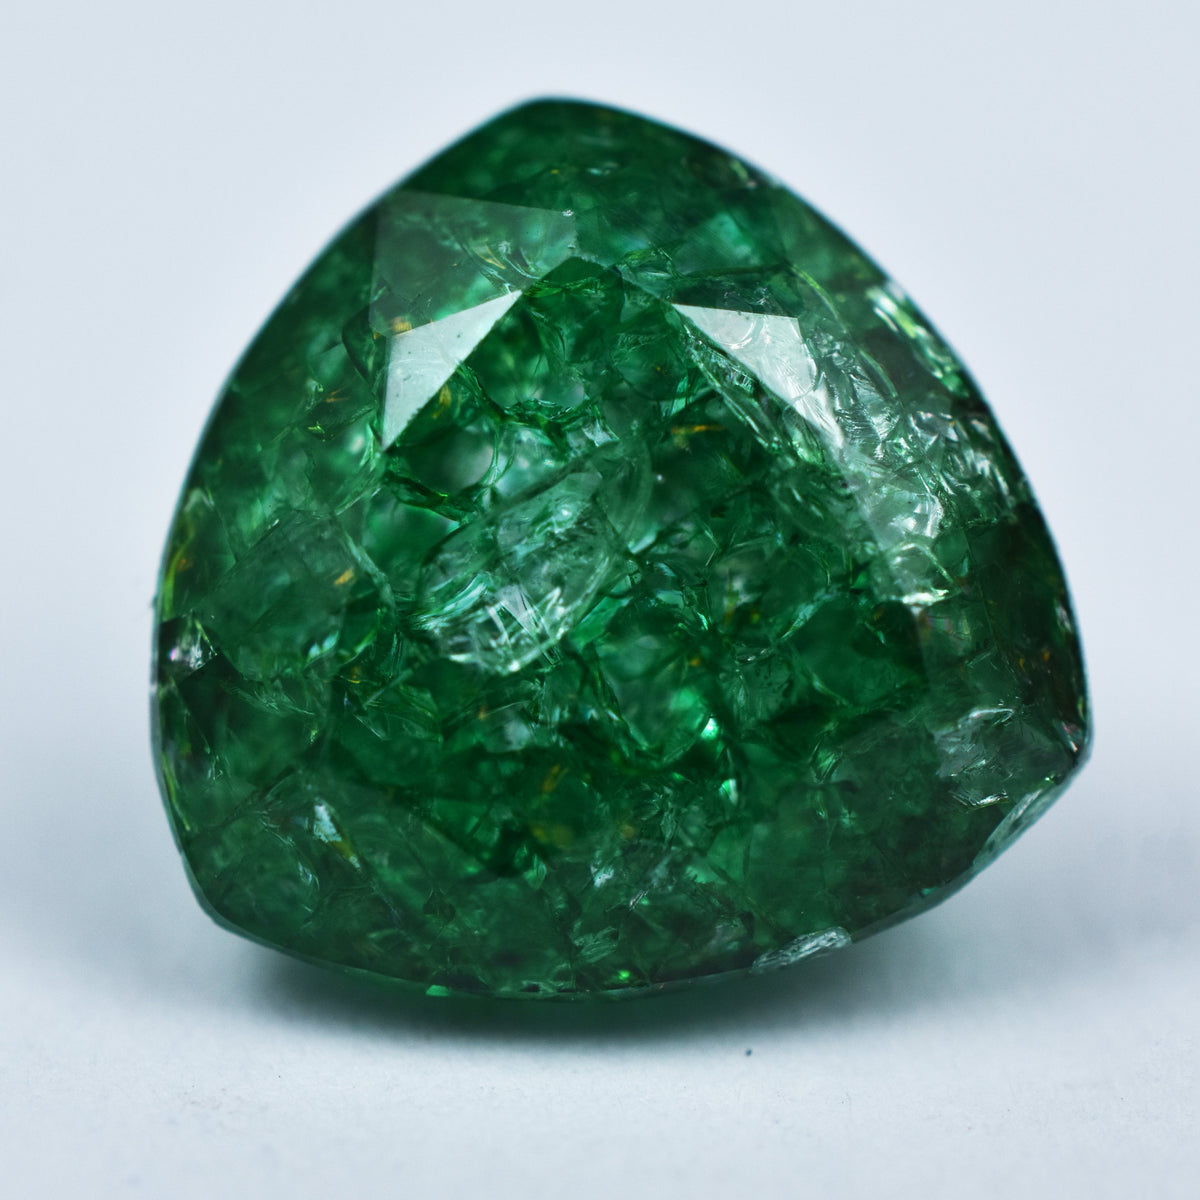 Has Quality Of Protection & Overall-Well Being , 9.25 Carat Trillion Cut Green EMERALD Natural Certified Loose Gemstone | Jewelry Making Gem | Green Emerald Rings | ON SALE